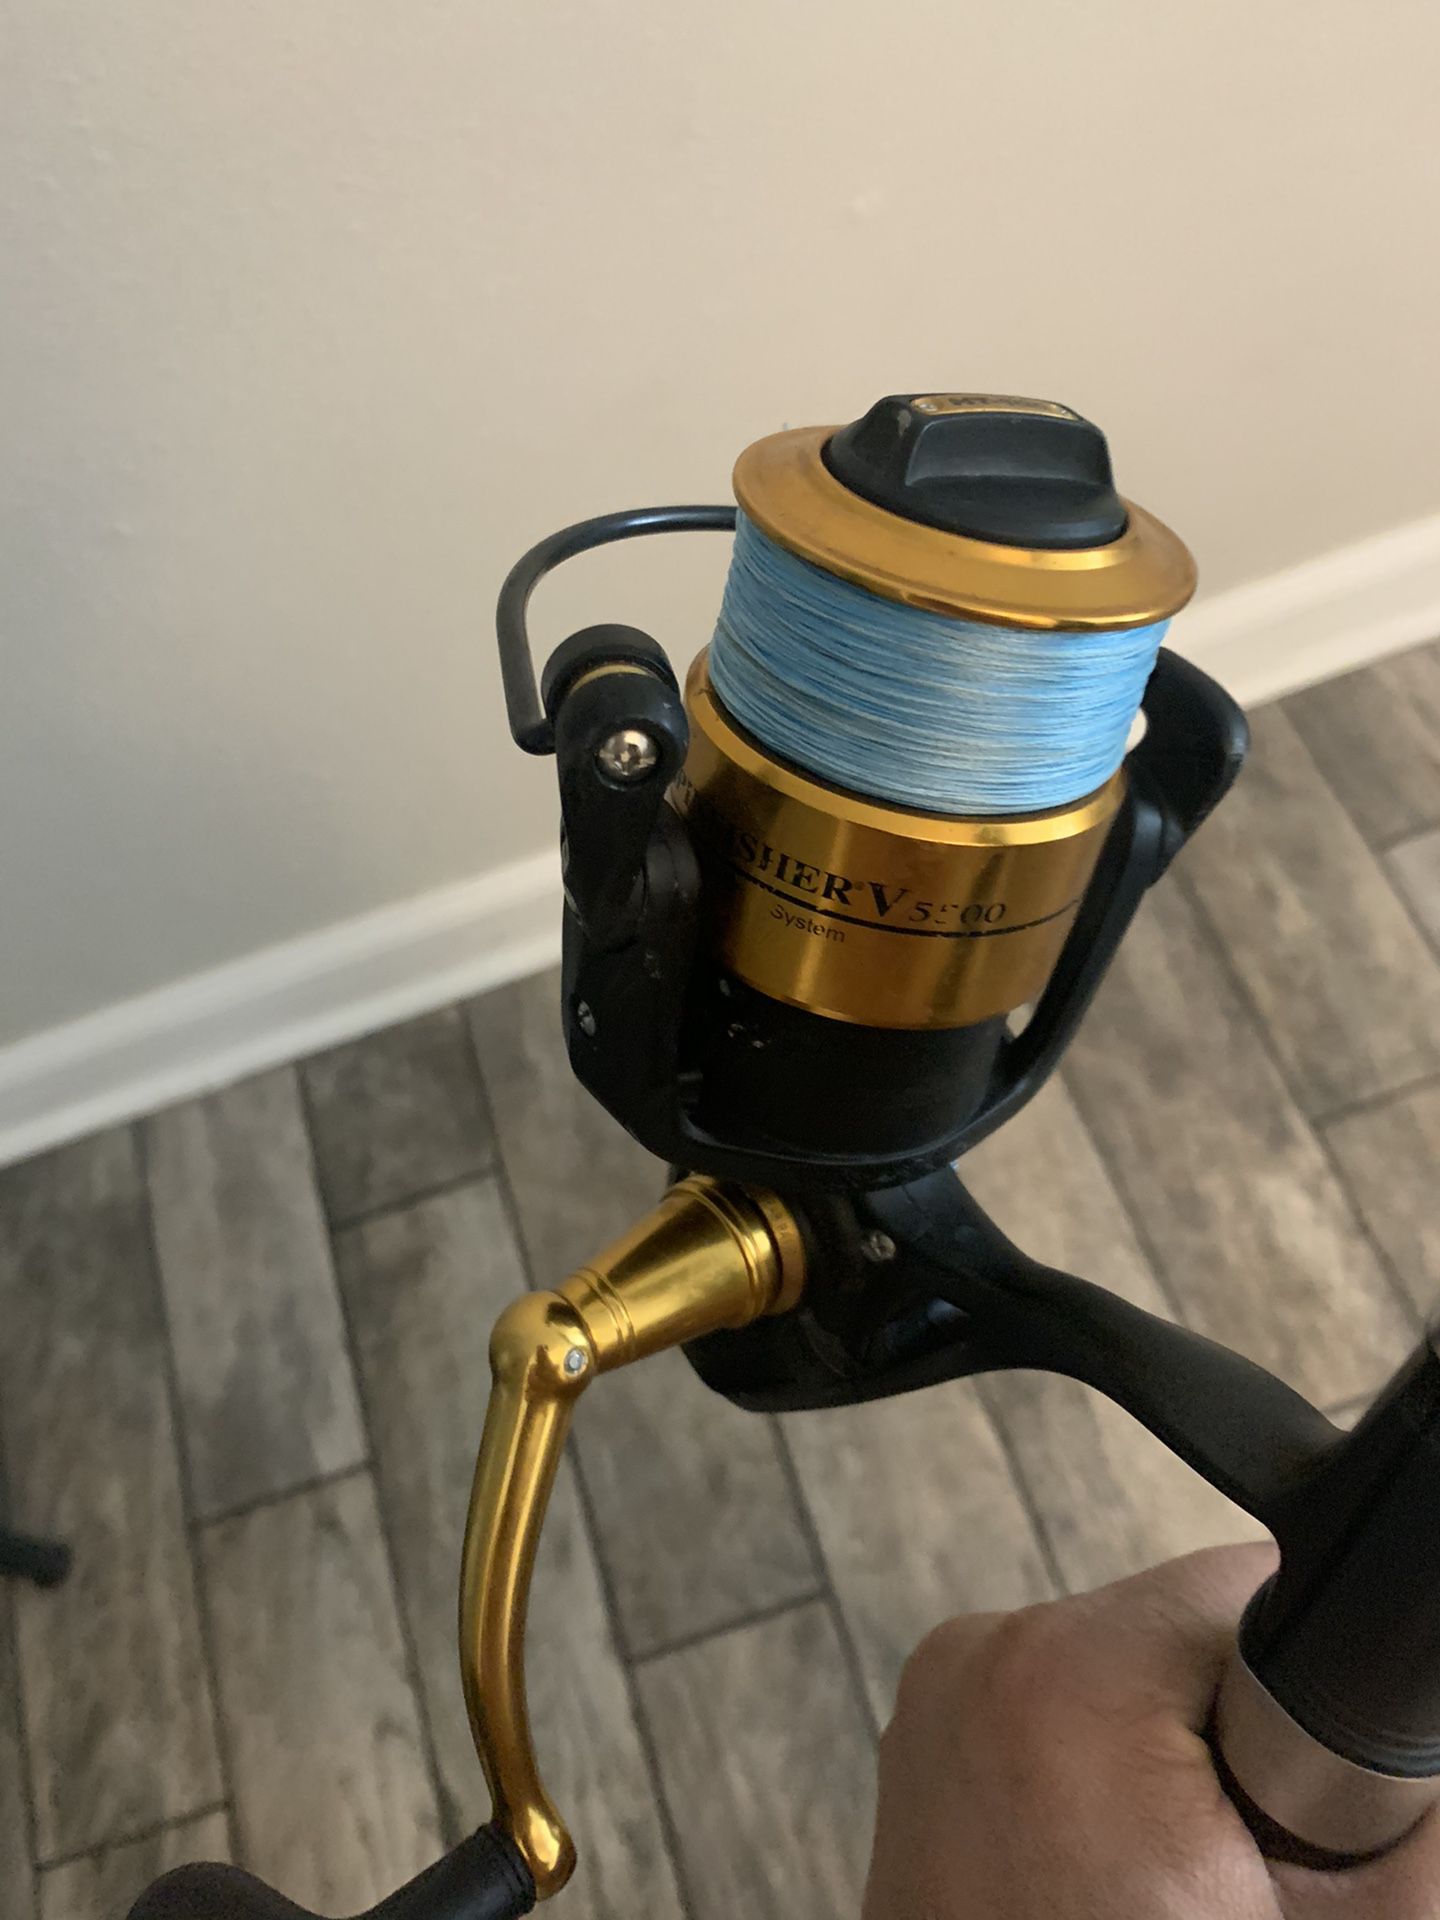 Penn Spinfisher 5500 Reel and Star Rod Delux Fishing Rod for Sale